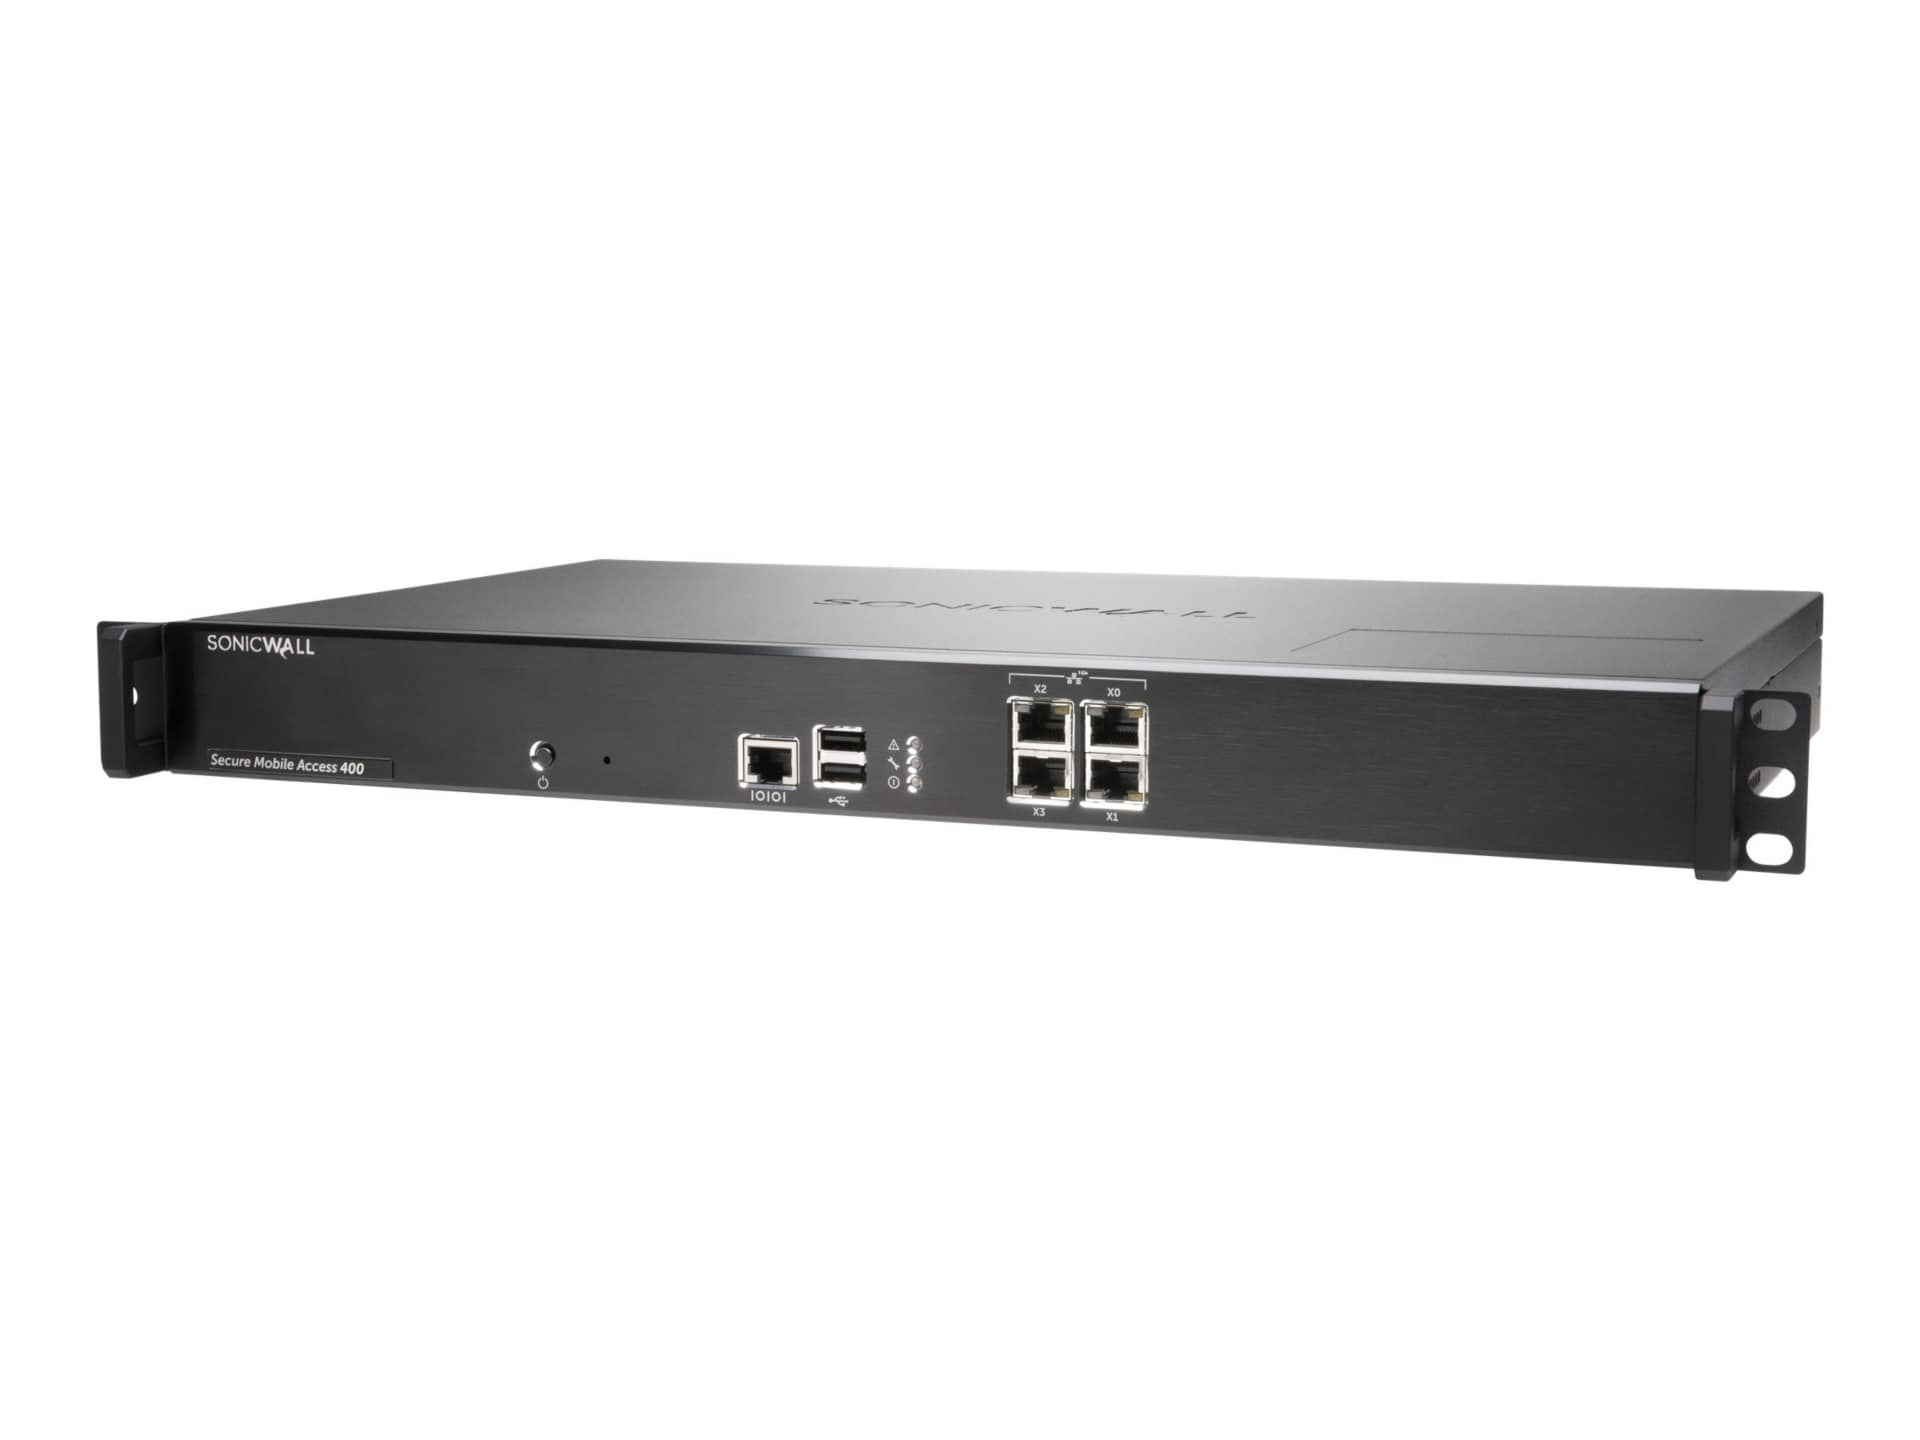 SonicWall Secure Mobile Access 410 - security appliance - with 3 years 24x7